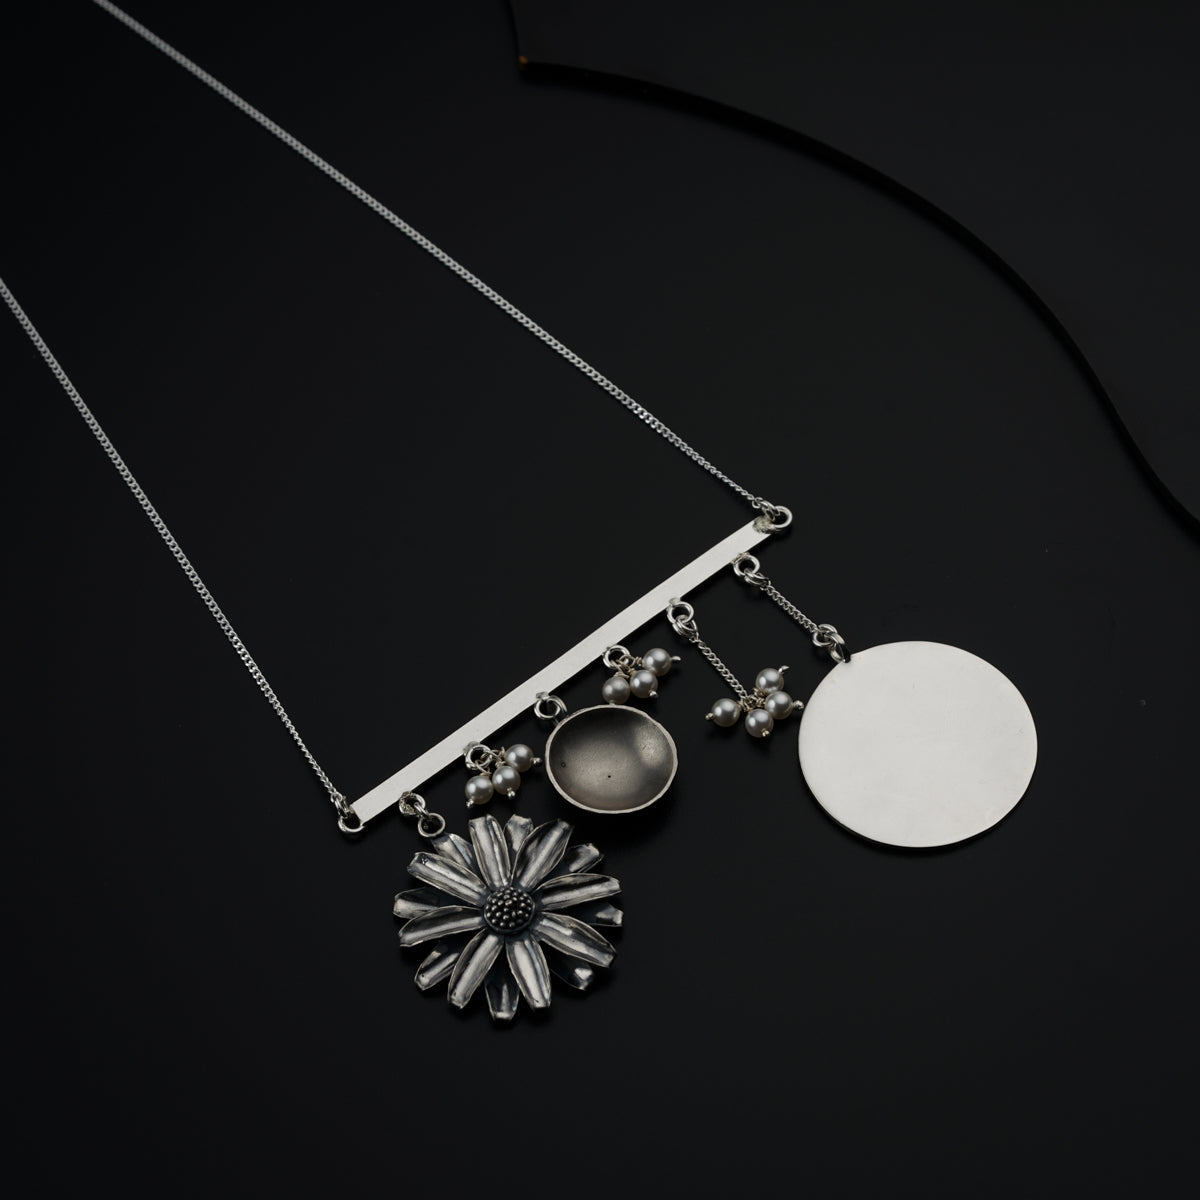 a necklace with a flower and a disc hanging from it